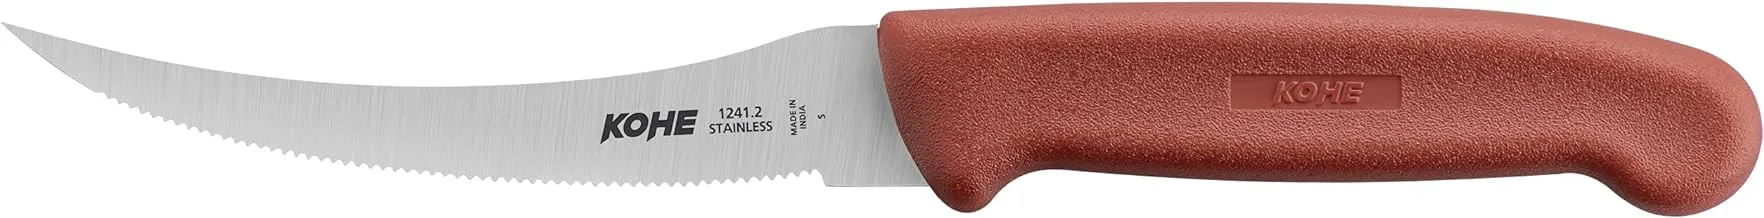 Kohe Stainless Steel Utility Serrated Chef/Kitchen Knife, Assorted